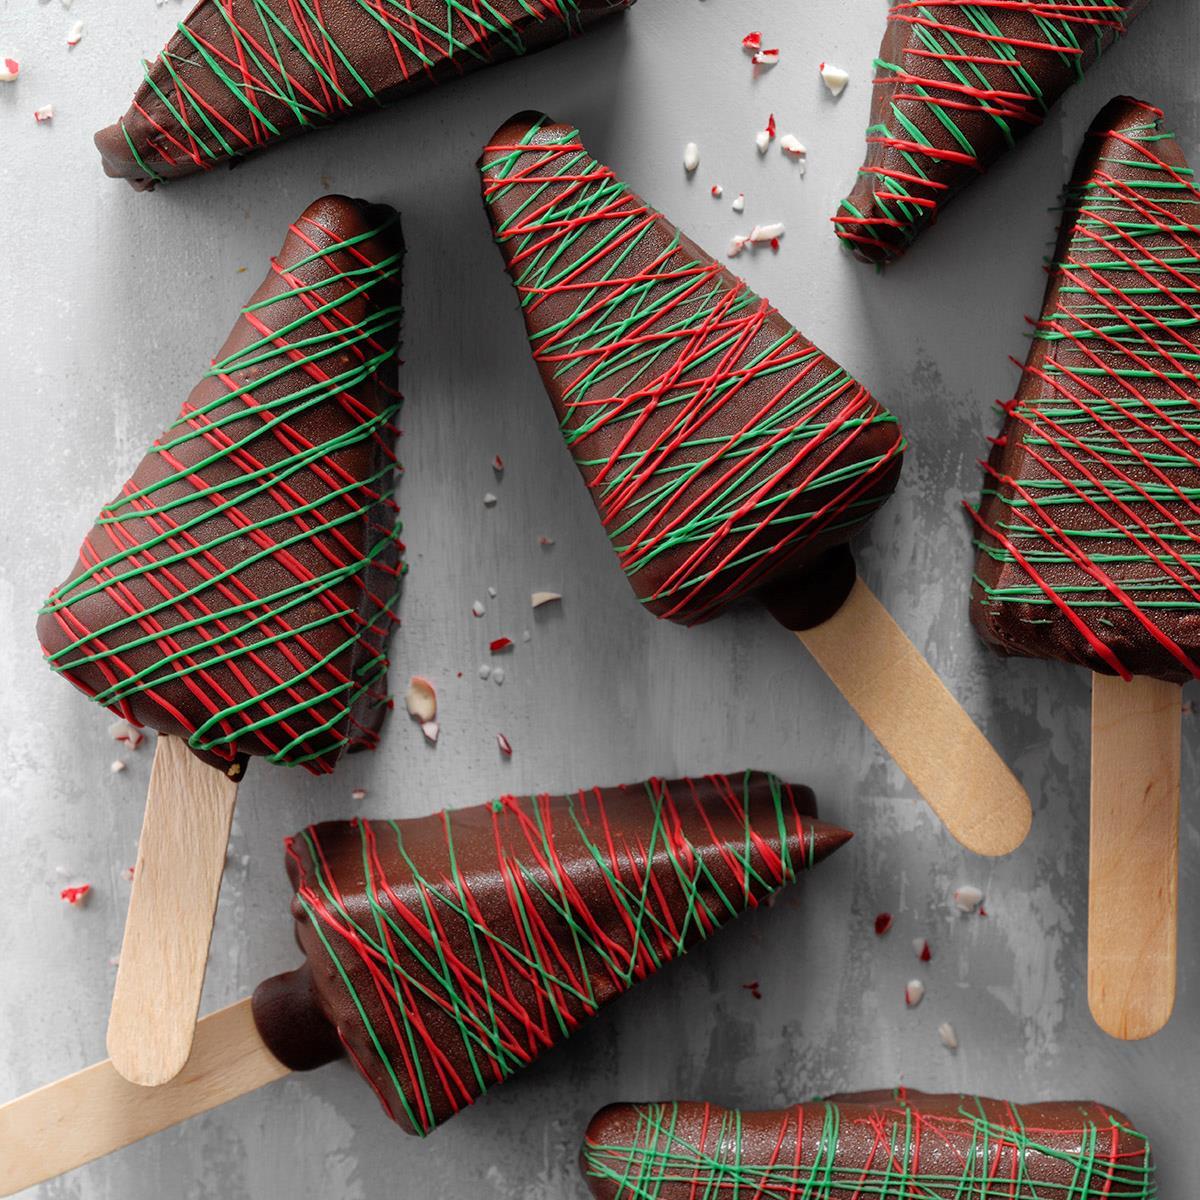 Peppermint Cheesecake on a Stick image